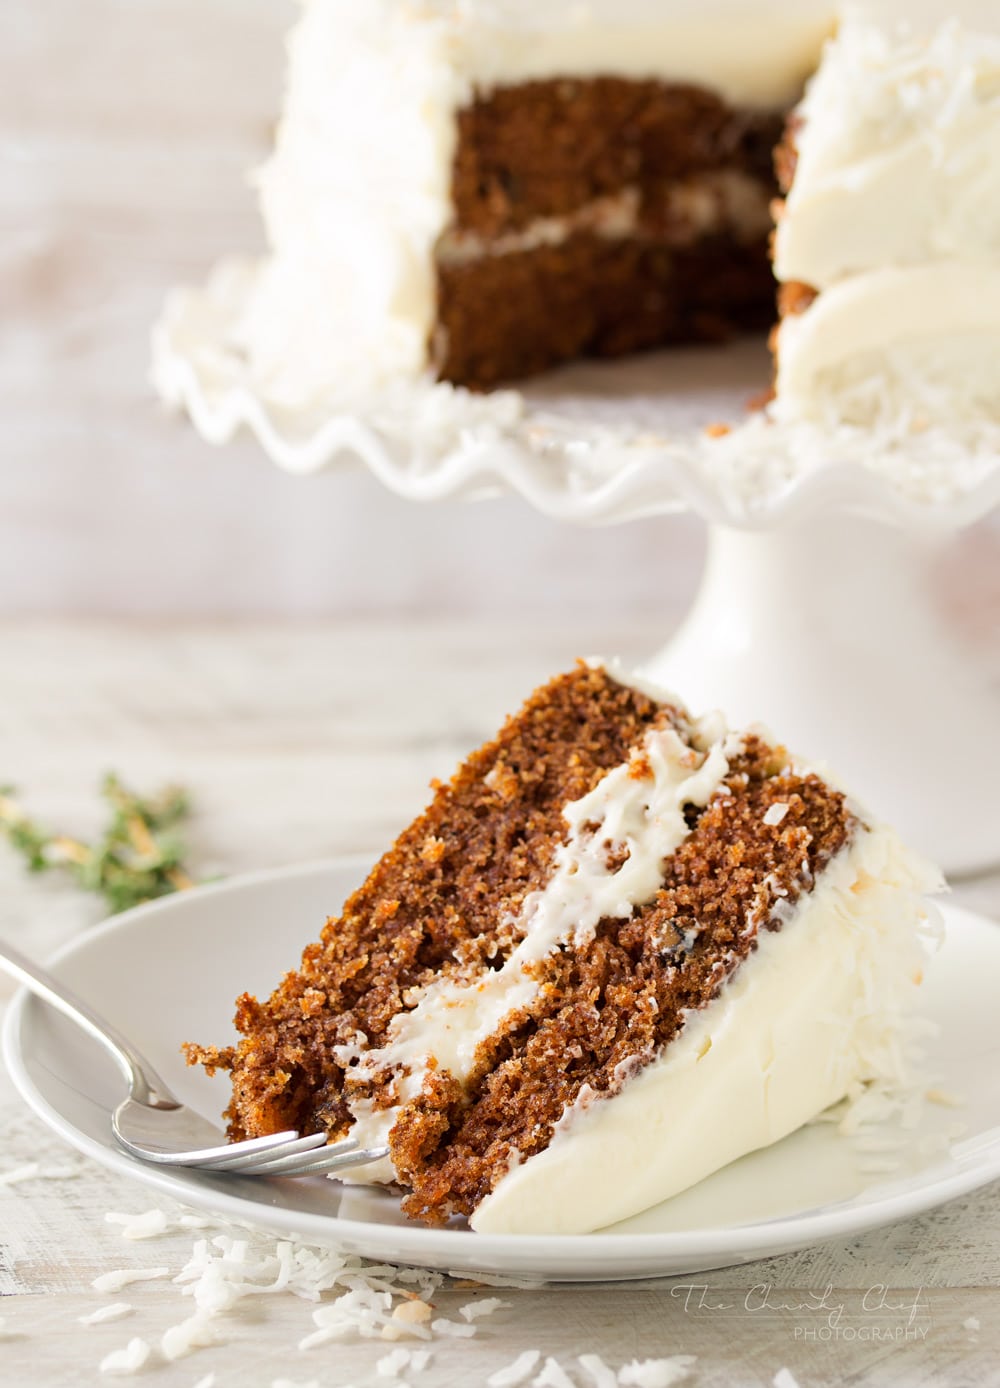 The Best Classic Carrot Cake | Rich, moist, and full of flavor, this carrot cake has been my Mom's signature dessert for years! Try this cake and you'll immediately know why! | http://thechunkychef.com